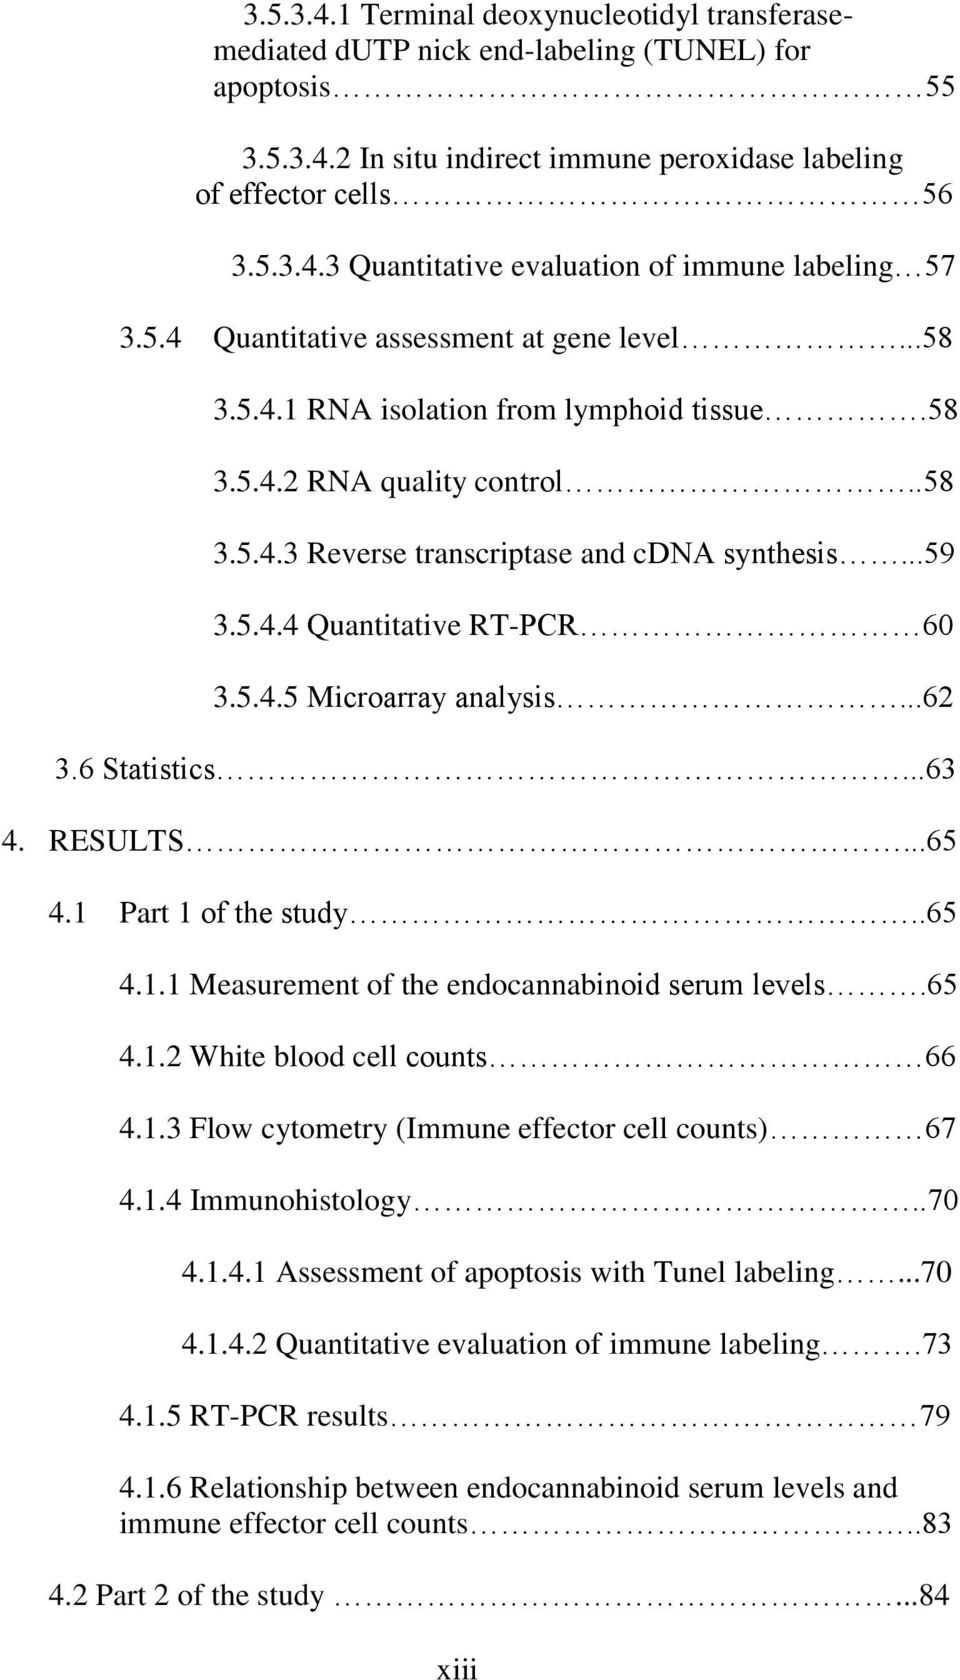 5.4.5 Microarray analysis...62 3.6 Statistics...63 4. RESULTS...65 4.1 Part 1 of the study..65 4.1.1 Measurement of the endocannabinoid serum levels.65 4.1.2 White blood cell counts 66 4.1.3 Flow cytometry (Immune effector cell counts) 67 4.